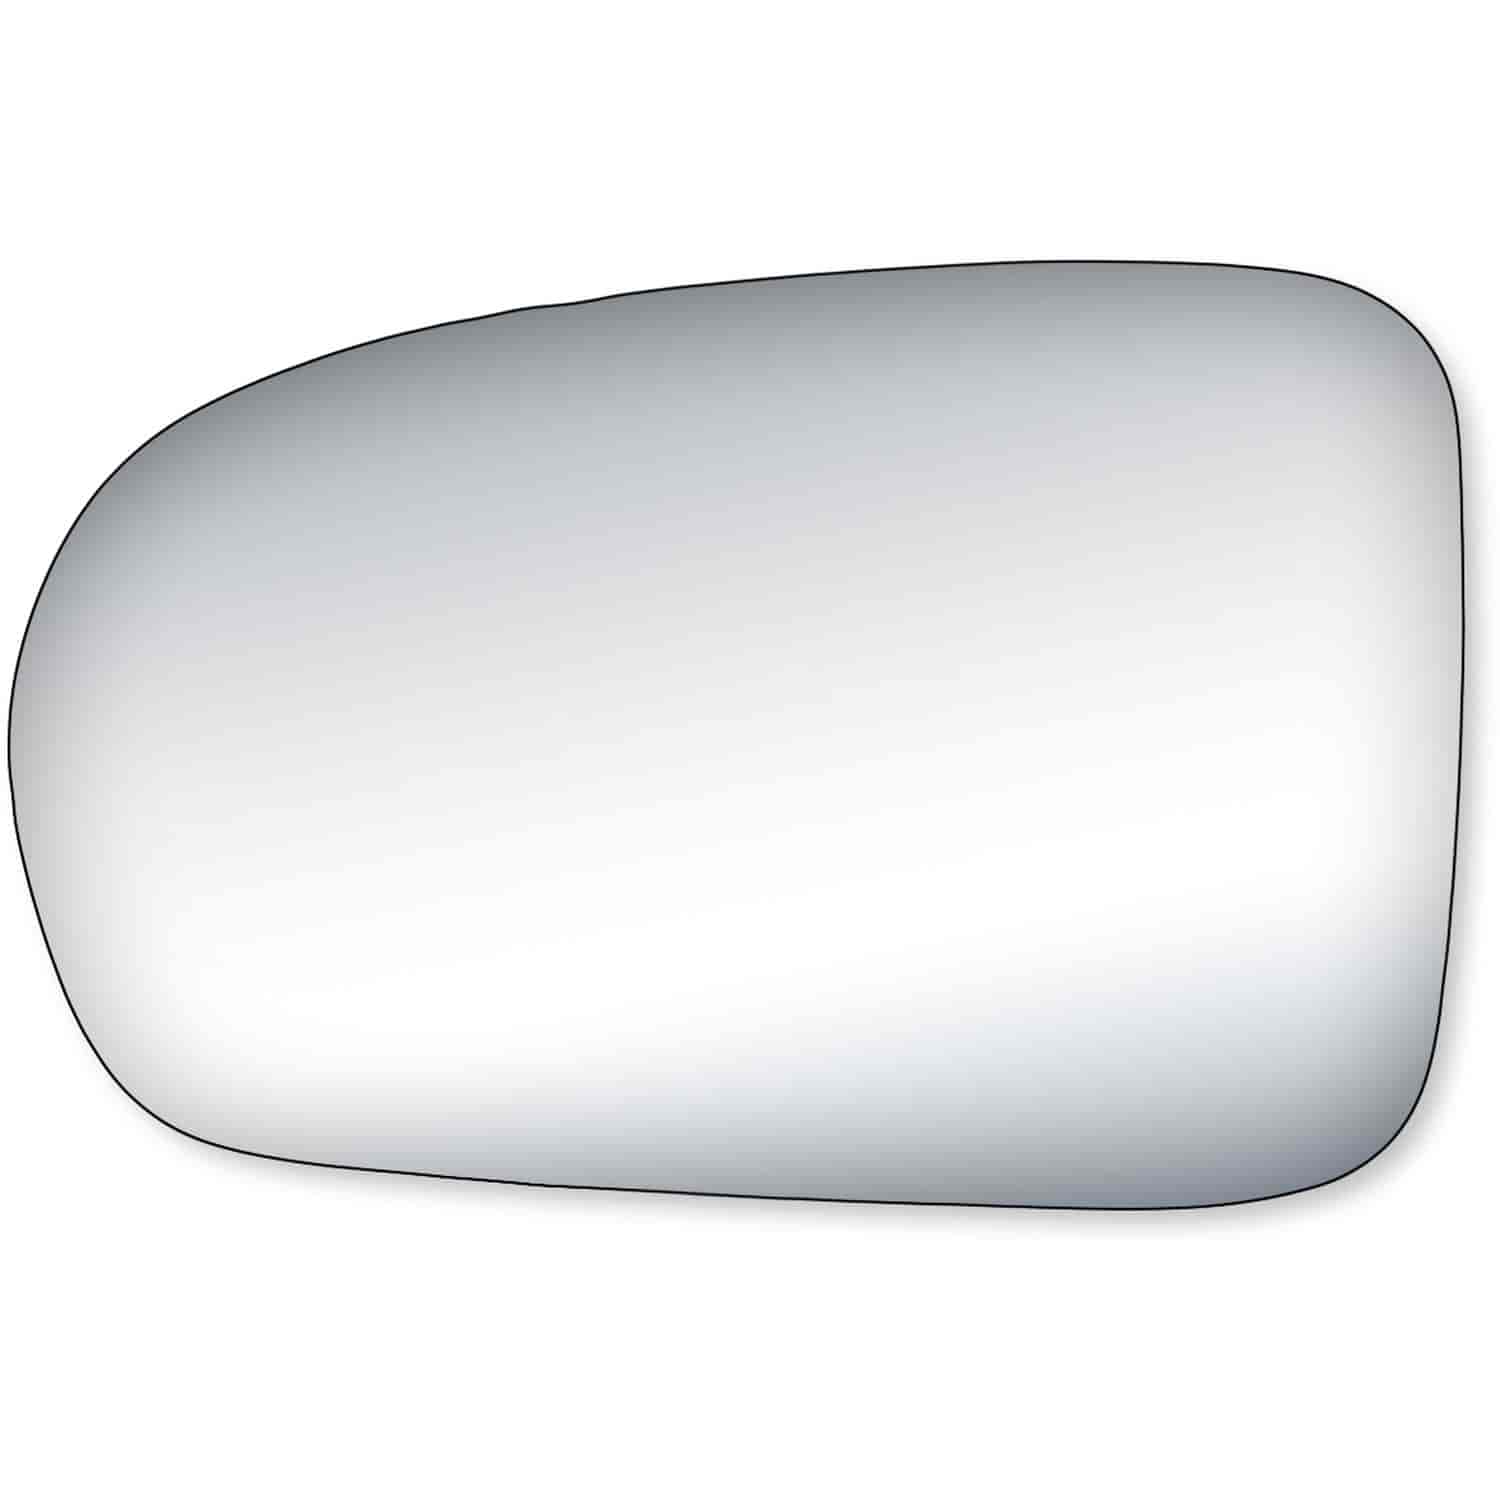 Replacement Glass for 01-05 Civic Coupe/ Sedan the glass measures 4 3/16 tall by 6 13/16 wide and 7